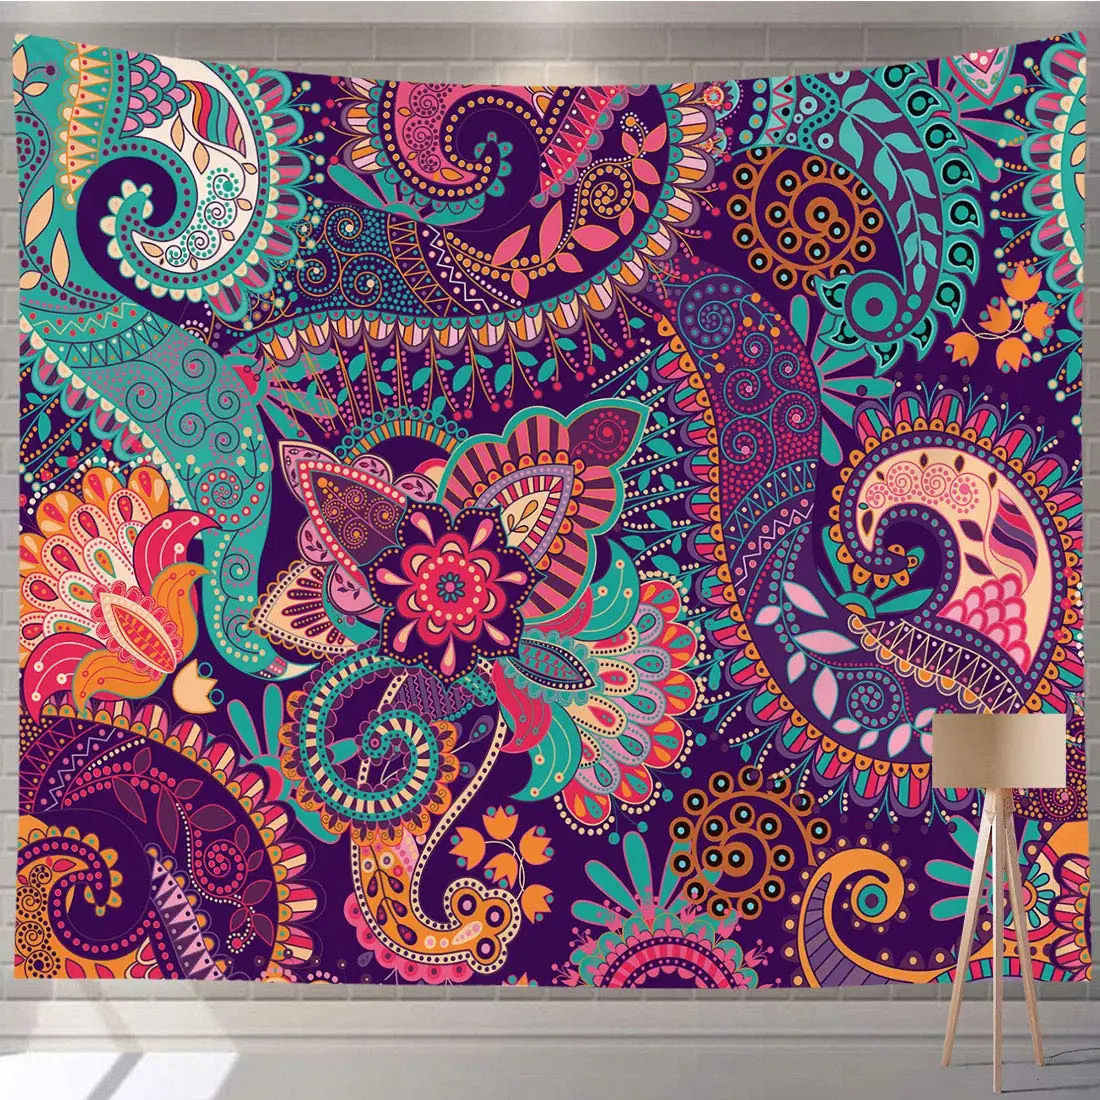 

Ethnic Tapestry Colorful Flowers Paisley Motifs Style Nature Doodle Tapestry Wall Hanging Decor for Bedroom Living Room Dorm